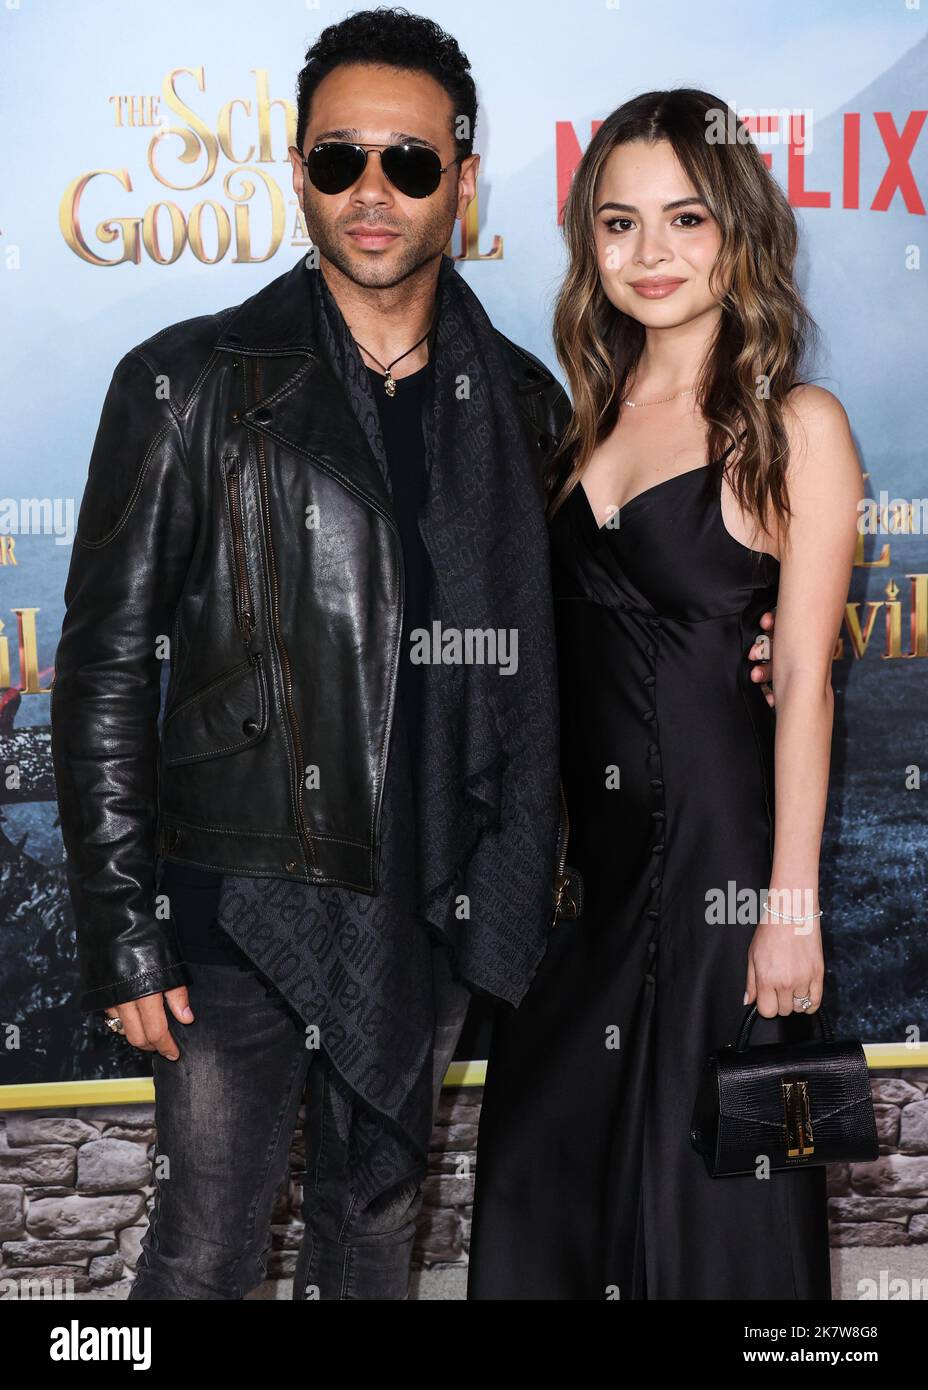 Westwood, United States. 18th Oct, 2022. WESTWOOD, LOS ANGELES, CALIFORNIA, USA - OCTOBER 18: Corbin Bleu and Sasha Clements arrive at the World Premiere Of Netflix's 'The School For Good And Evil' held at Regency Village Theatre on October 18, 2022 in Westwood, Los Angeles, California, United States. (Photo by Xavier Collin/Image Press Agency) Credit: Image Press Agency/Alamy Live News Stock Photo